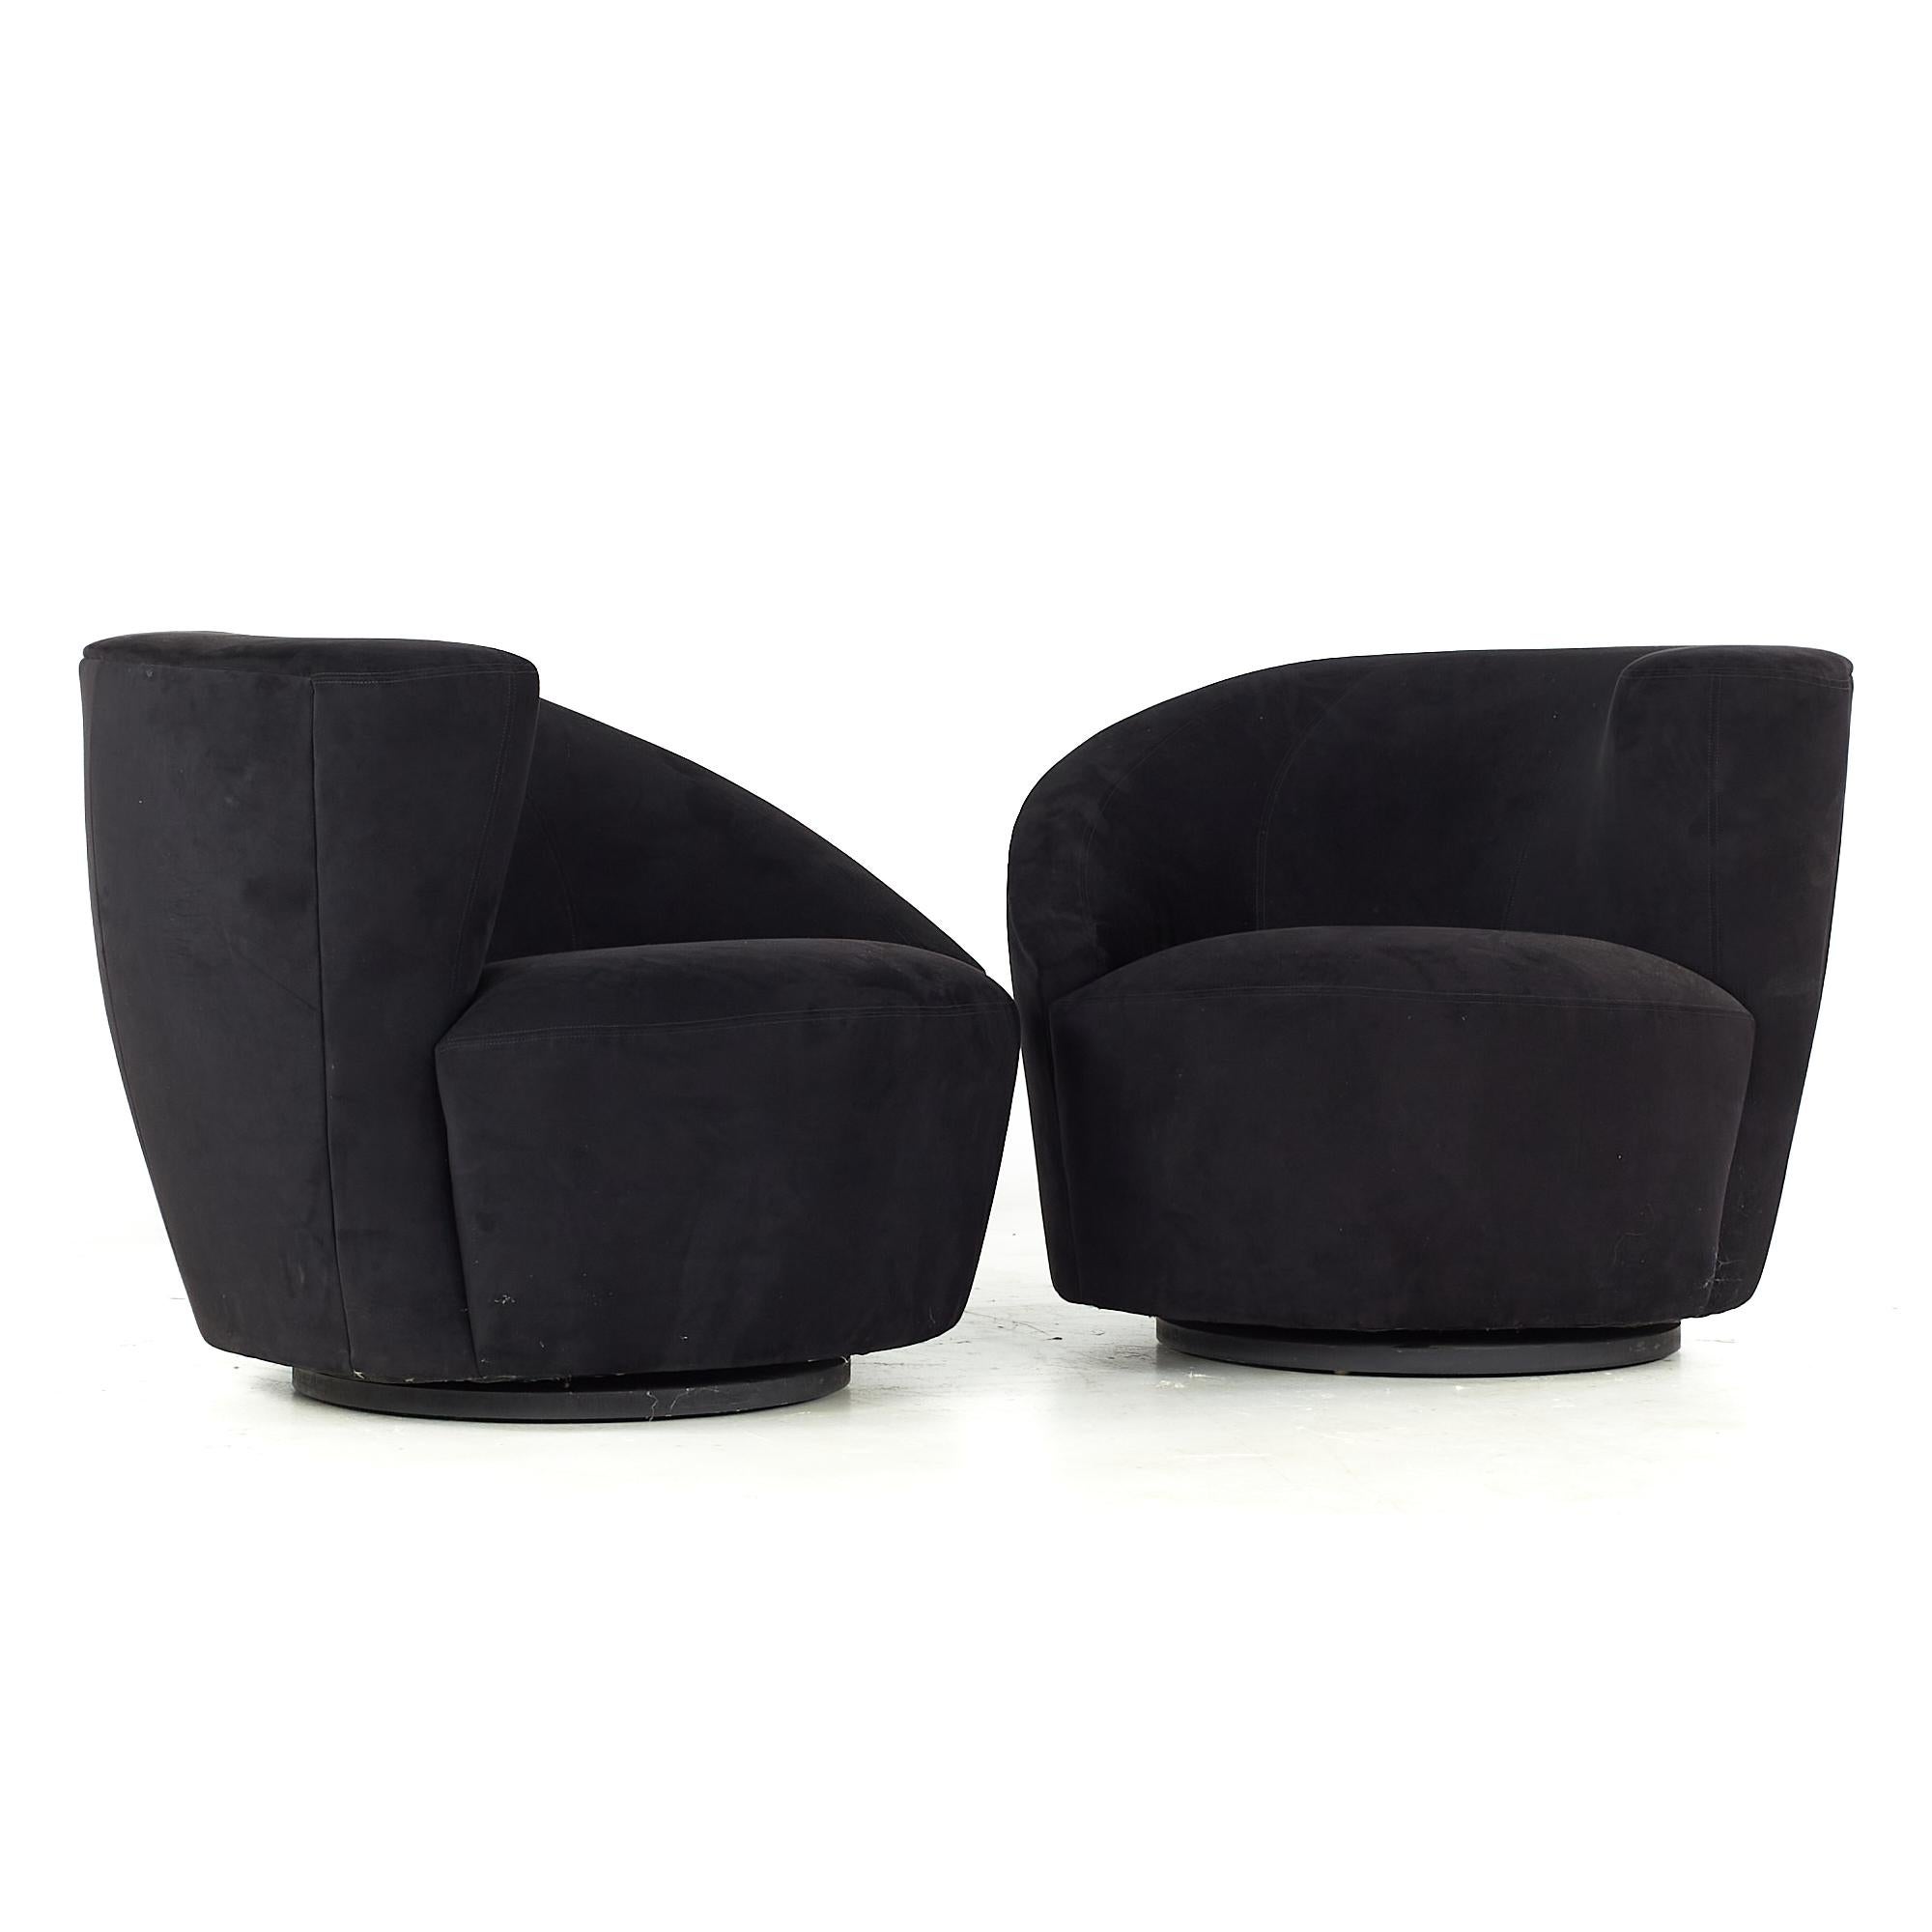 Vladimir Kagan for Weiman midcentury Nautilus Swivel Chairs - Pair

Each chair measures: 35.25 wide x 35.25 deep x 28.25 high, with a seat height of 17 and arm height/chair clearance 23 inches

All pieces of furniture can be had in what we call